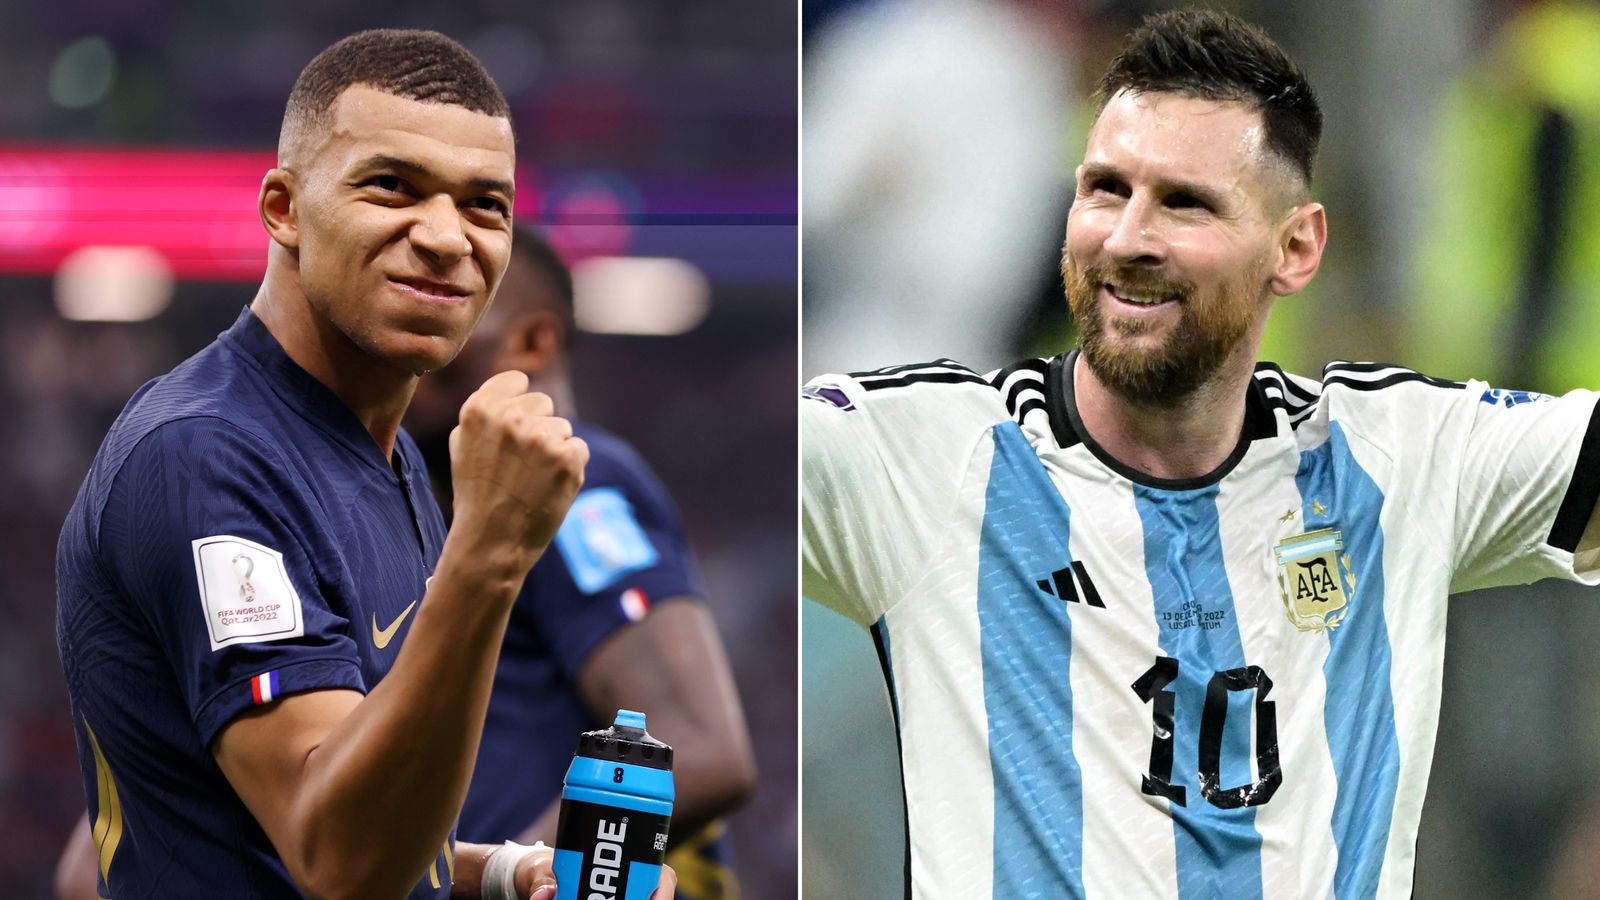 World Cup Final - Mbappe vs Messi